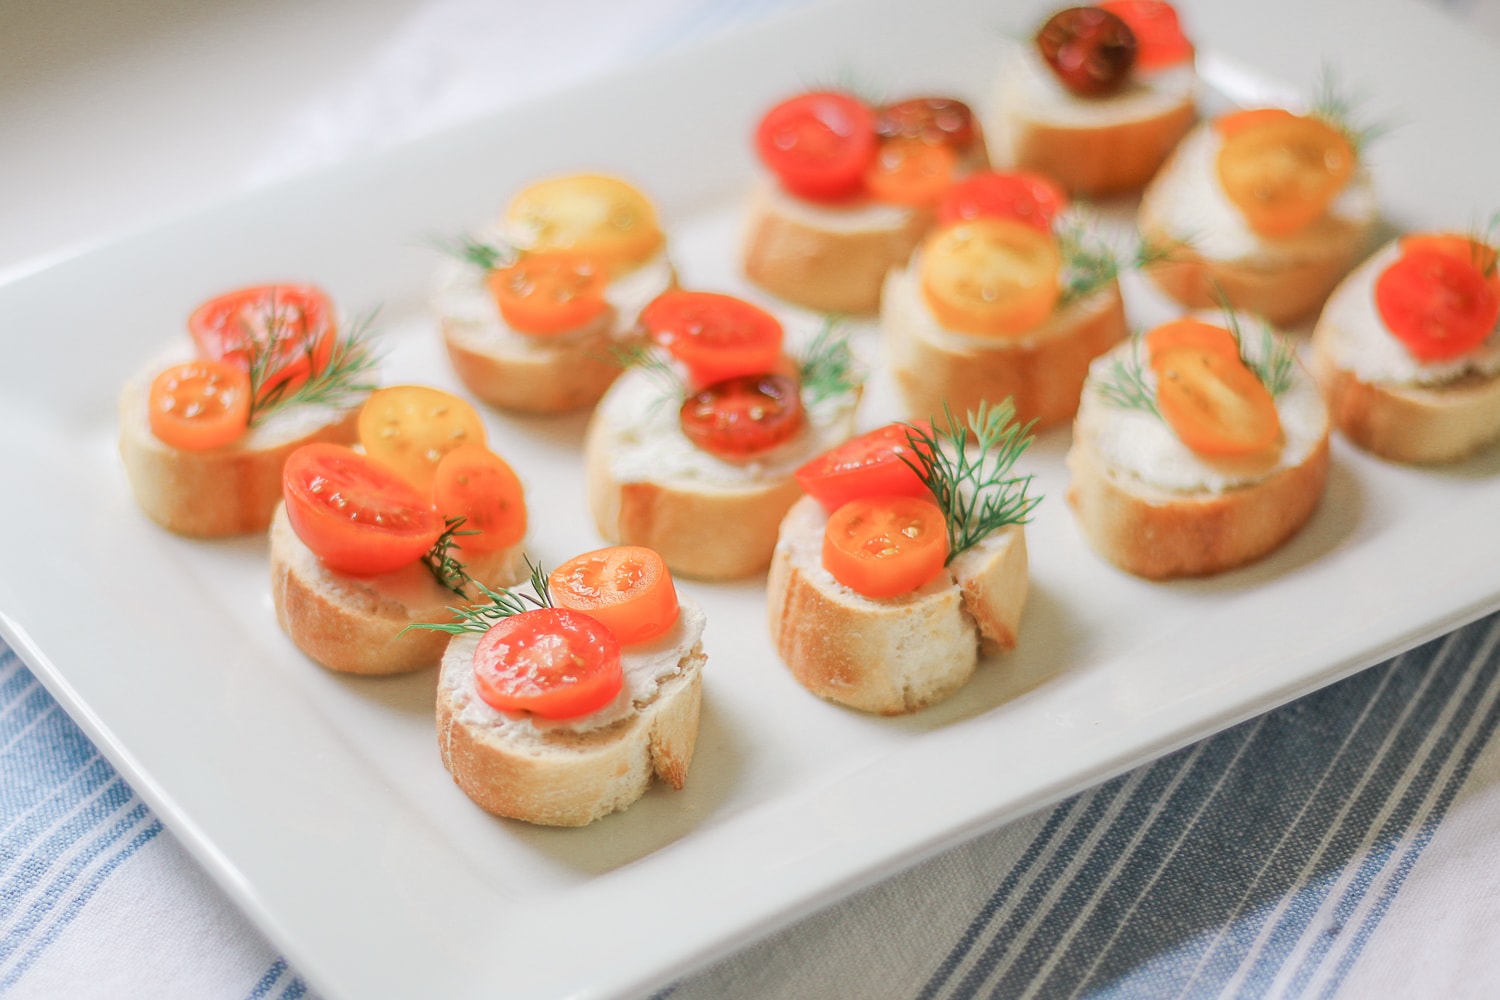 Southern lifestyle blogger Stephanie Ziajka shares a colorful tomato and goat cheese crostini recipe using NatureSweet Constellation tomatoes on Diary of a Debutante